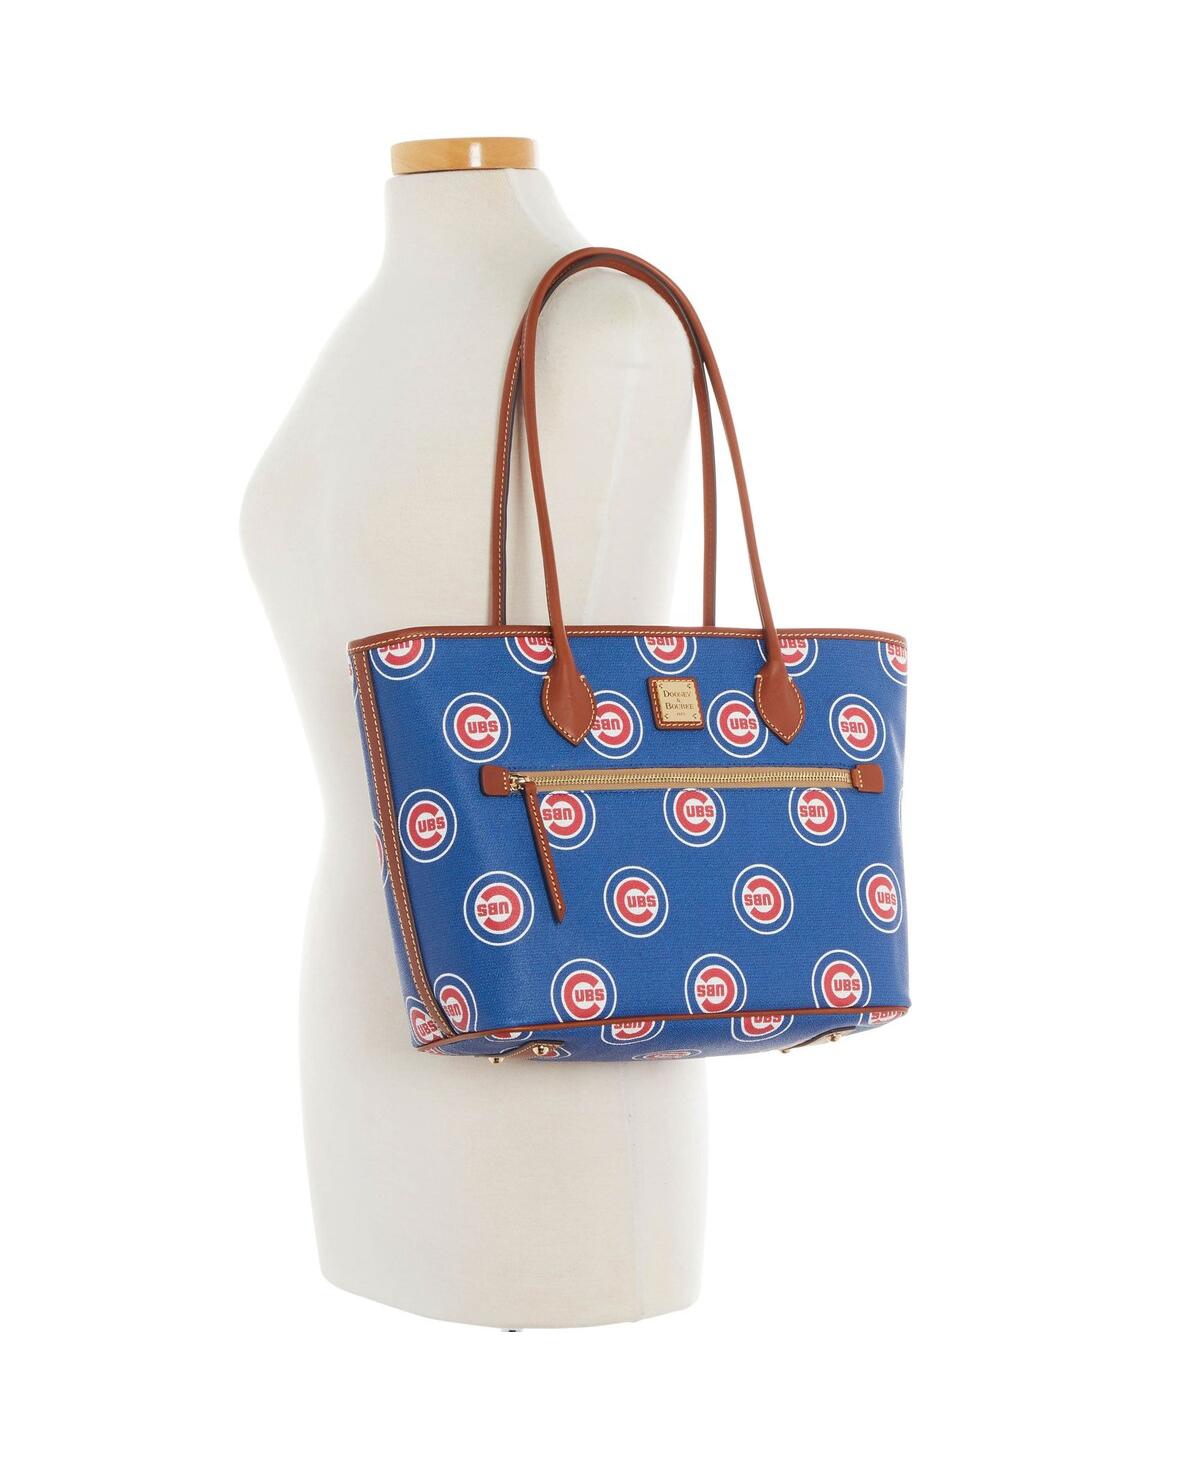 Shop Dooney & Bourke Women's  Chicago Cubs Sporty Monogram Tote In Royal